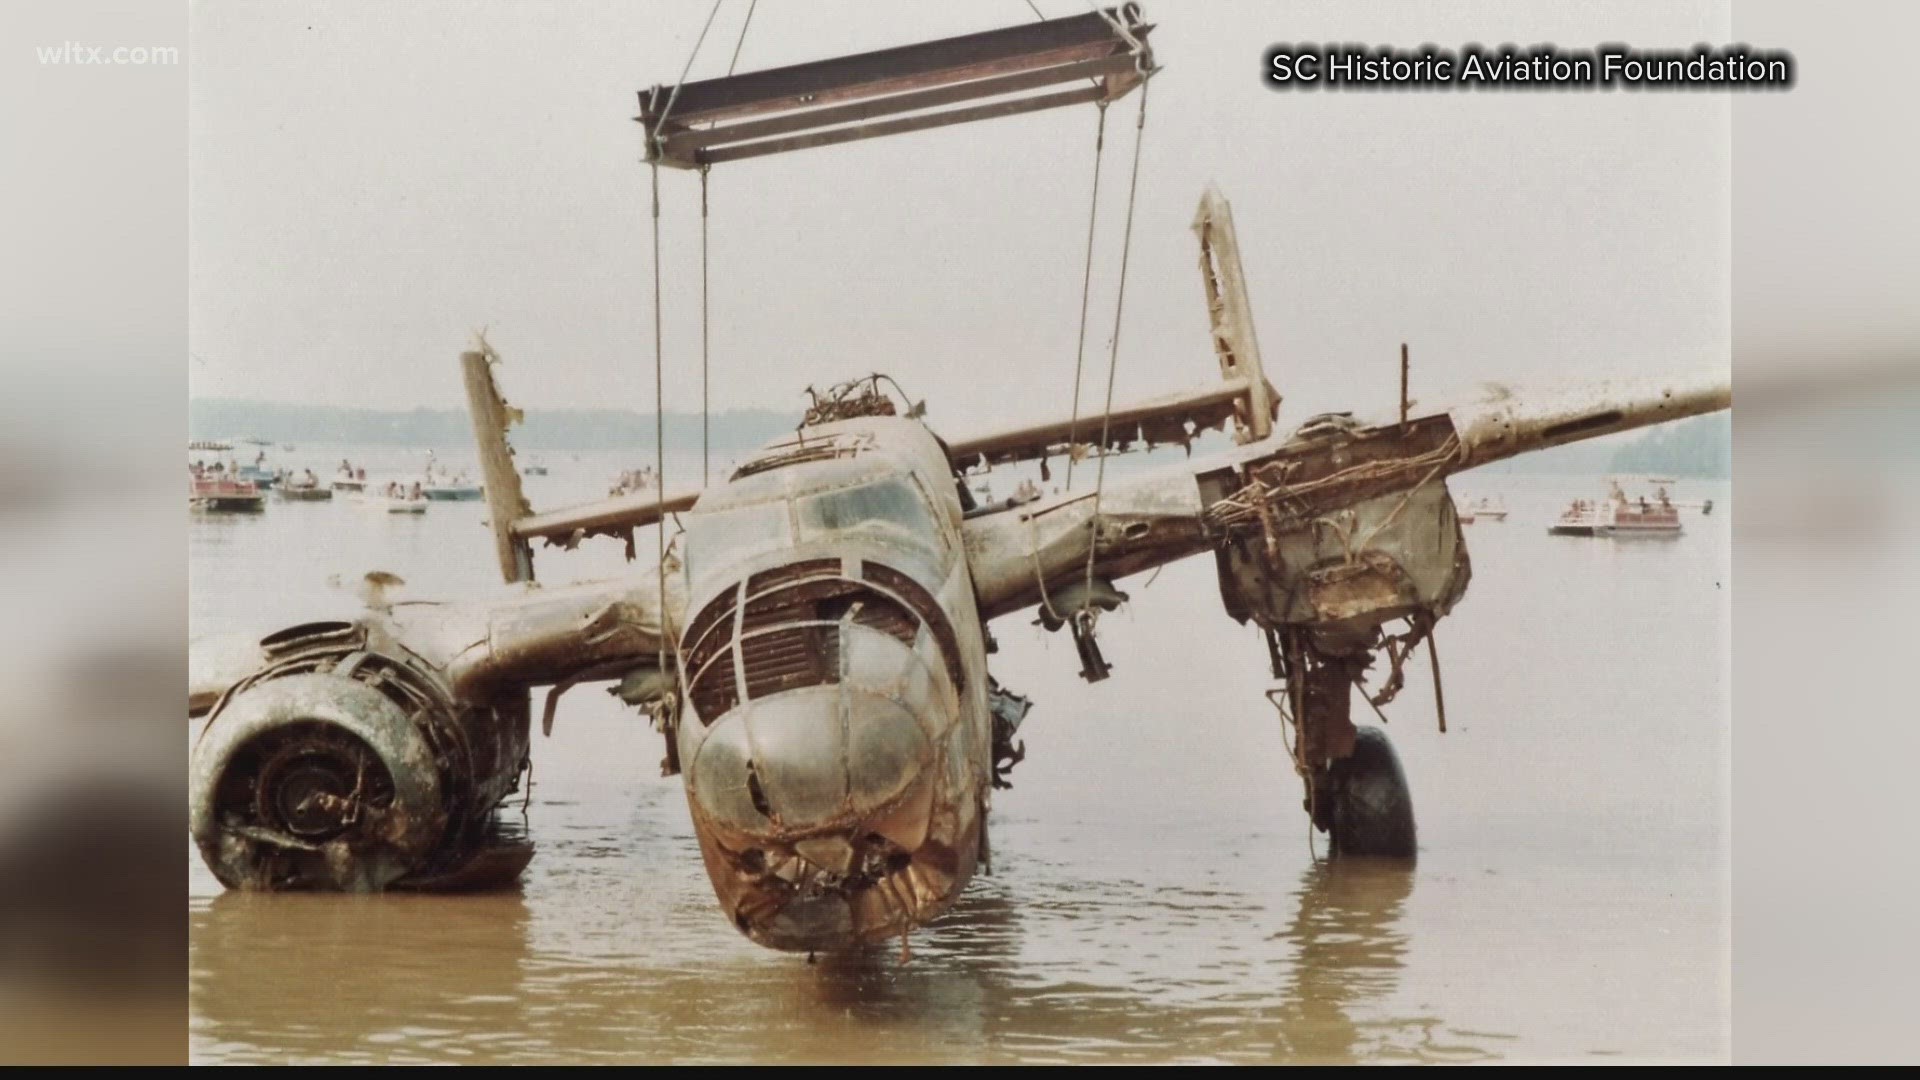 The B-25 bomber crashed into Lake Greenwood in 1944, and after decades of recovery and restoration efforts, the plane looks like the original.